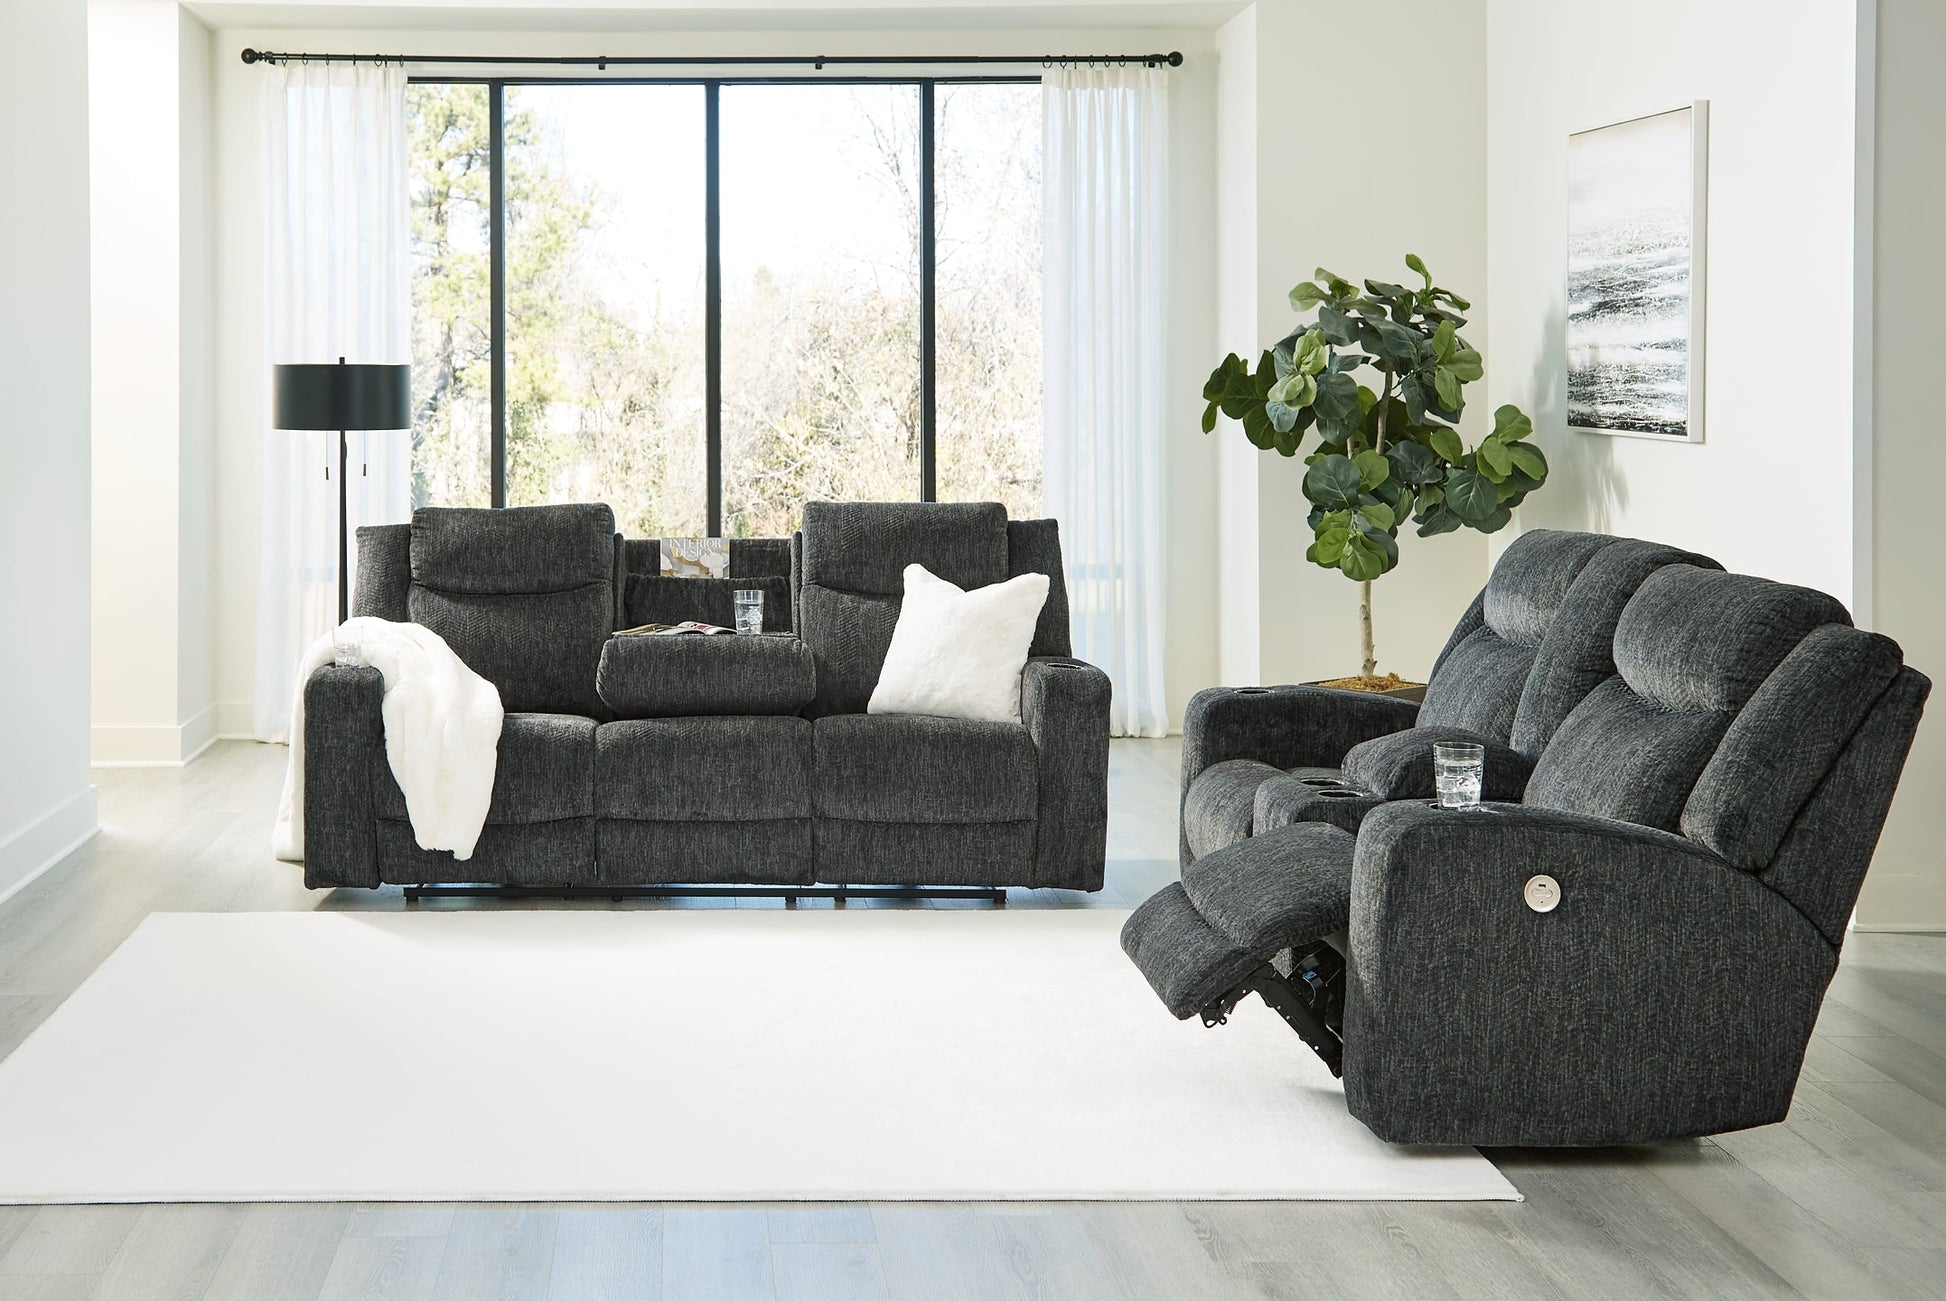 Martinglenn Sofa and Loveseat at Walker Mattress and Furniture Locations in Cedar Park and Belton TX.